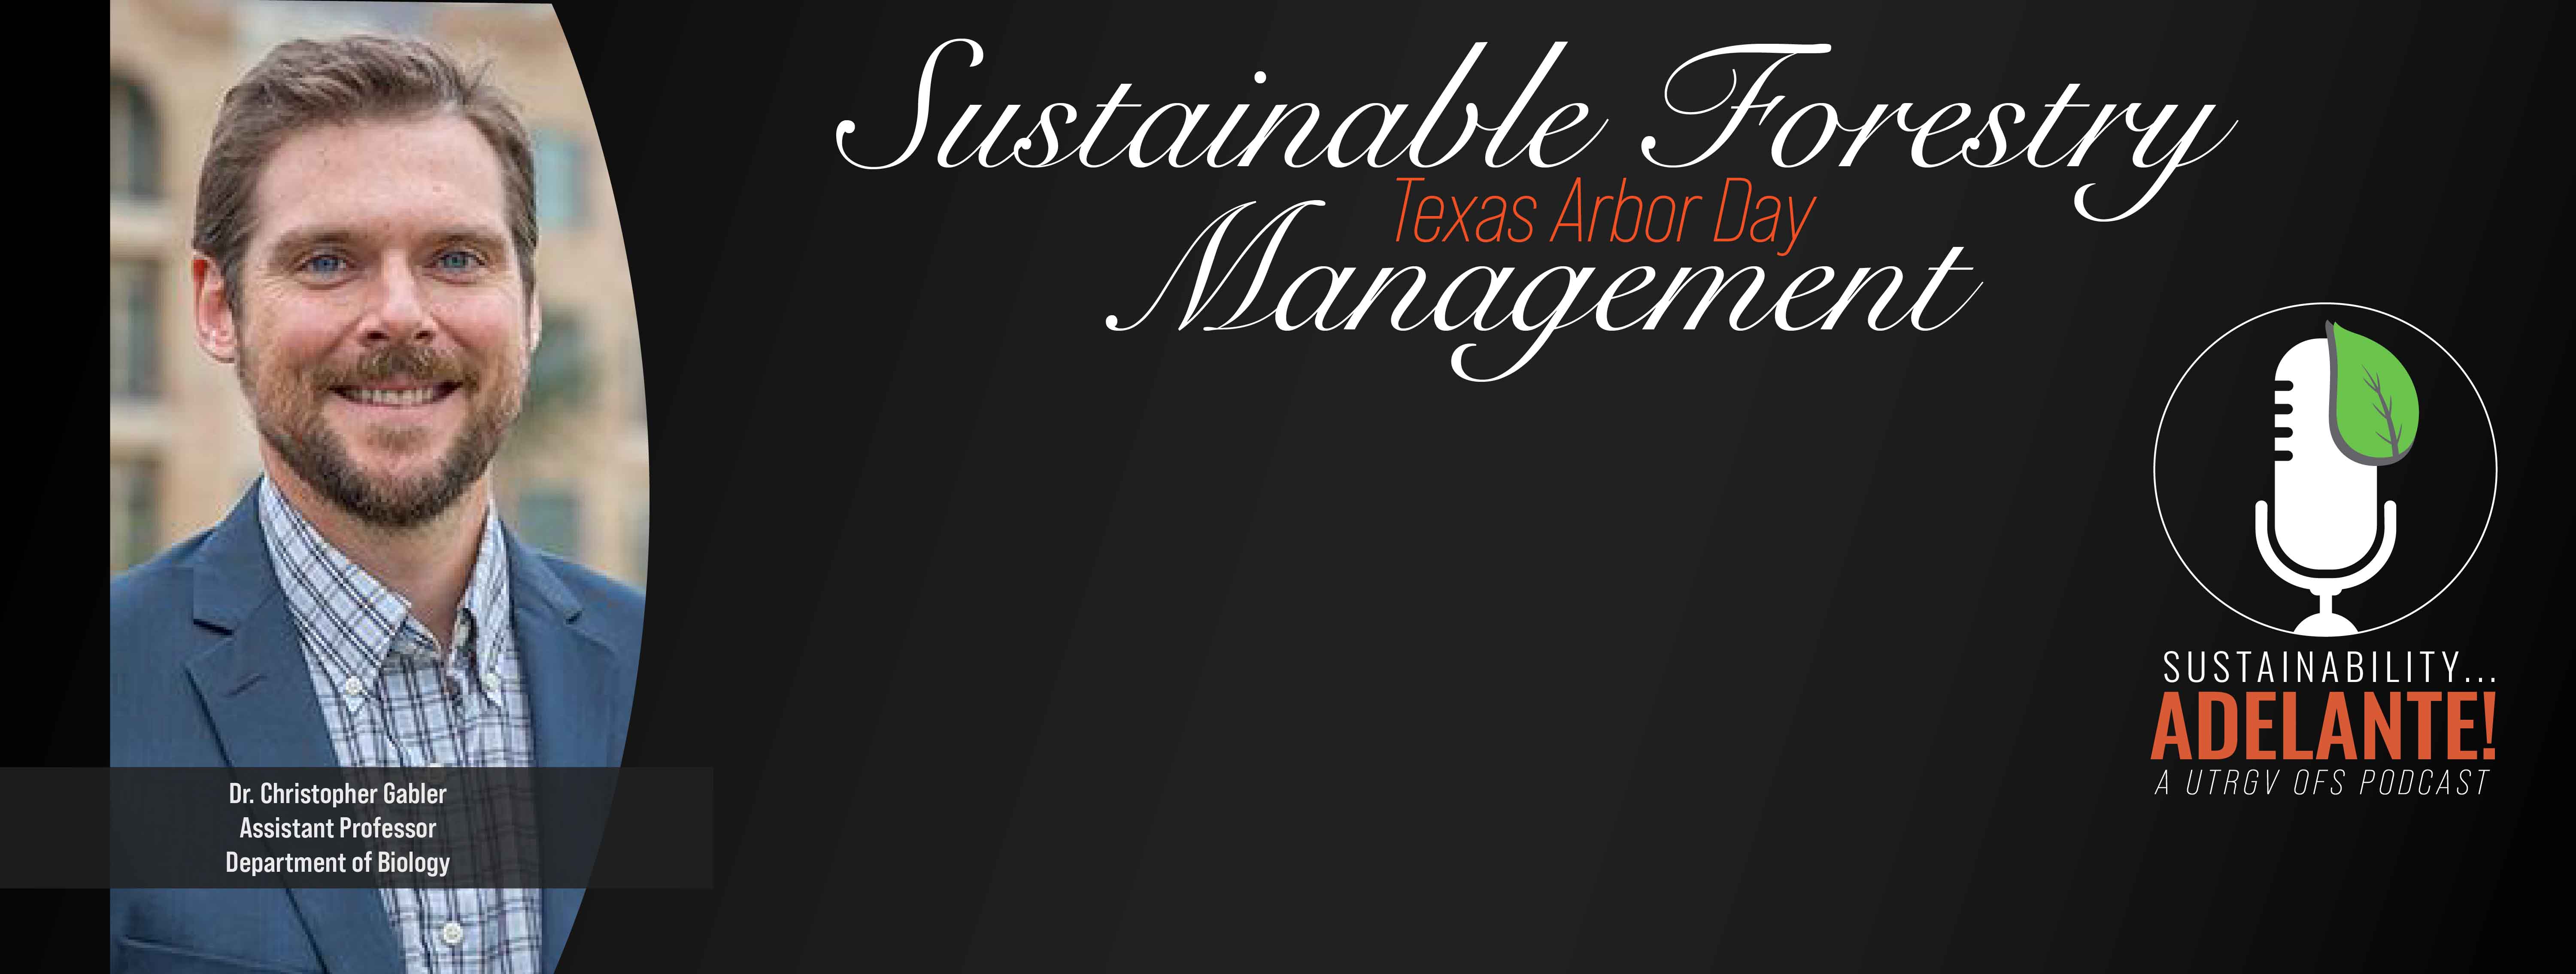 Sustainable Forestry Texas Arbor Day Management Dr. Christopher Gabler Assistant Professor Department of Biology Sustainability Adelante! A UTRGV OFS Podcast